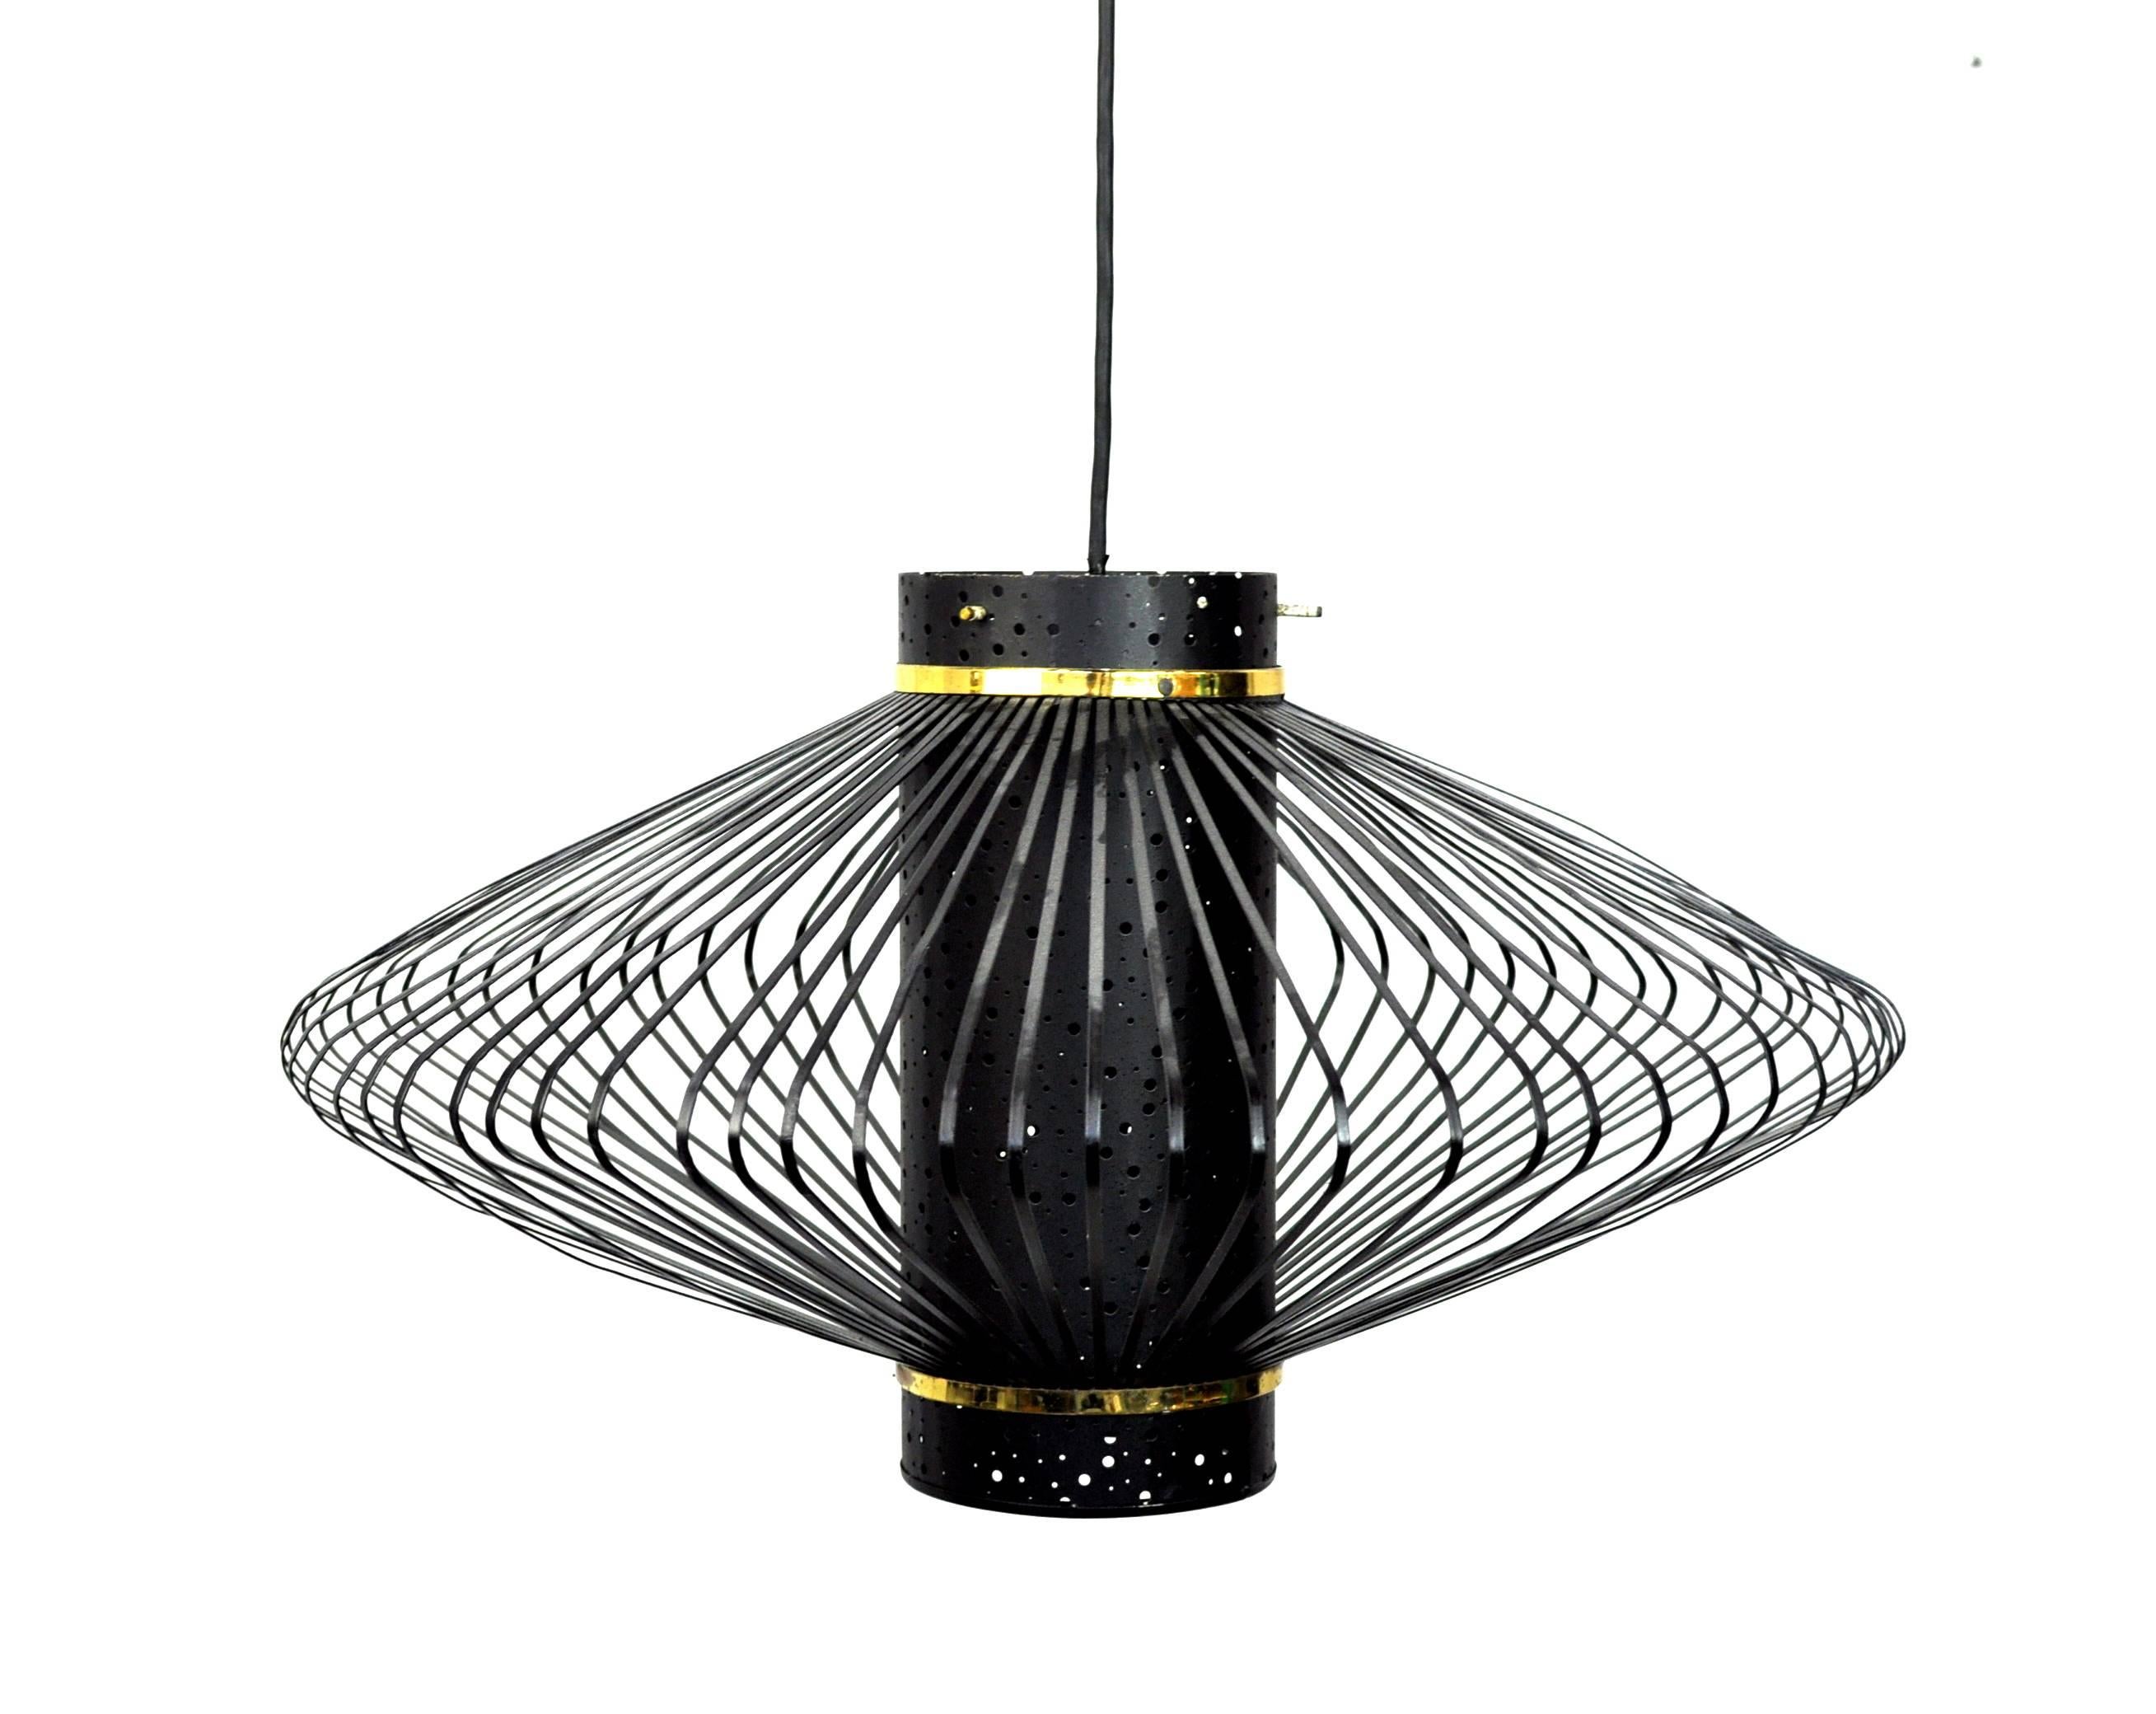 Brass and black enameled metal vintage pendant light fixture. The mid-century modern lamp features a perforated canister surrounded by a saucer shaped metal cage with solid brass accents. A very decorative and unique 1950s chandelier! This is